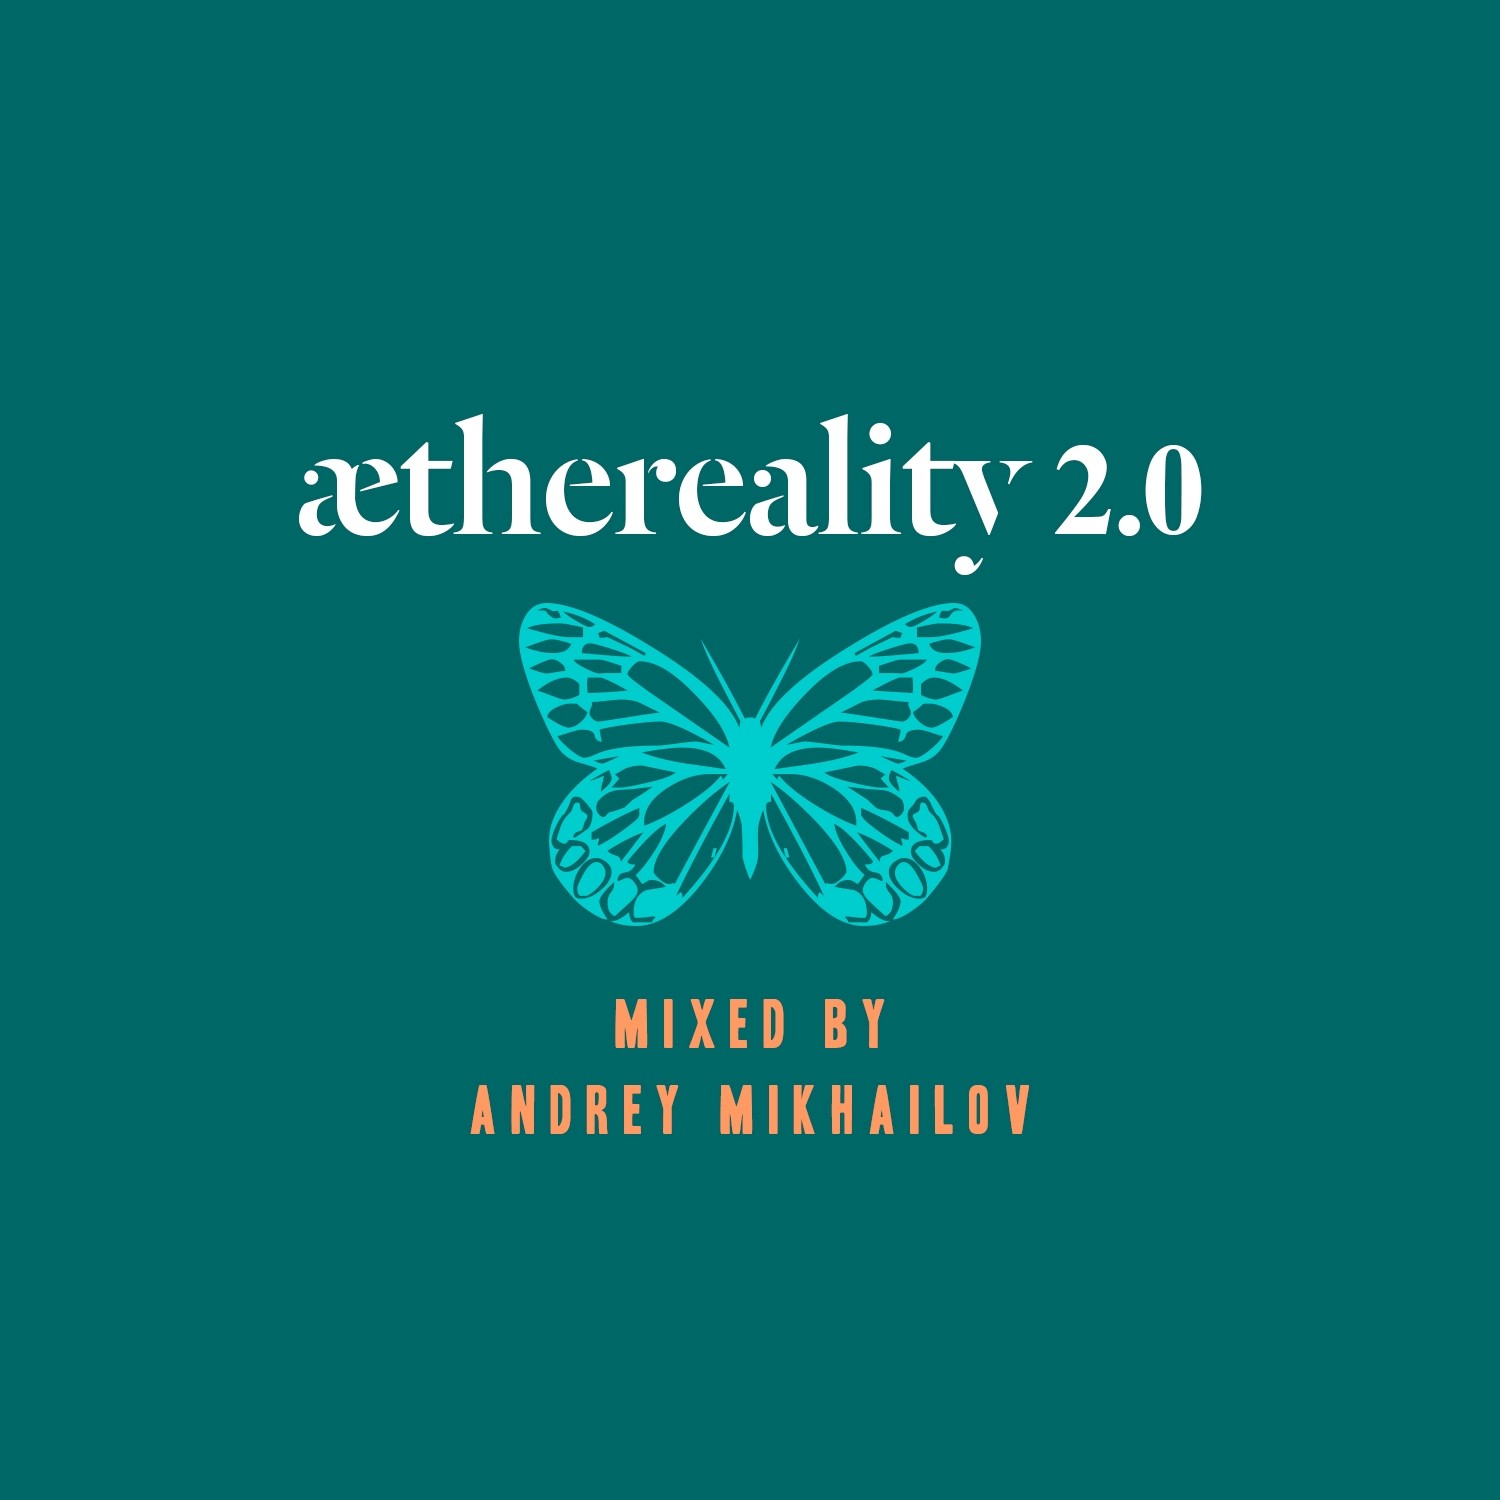 Aethereality 2.0 (Compiled and Mixed by Andrey Mikhailov)